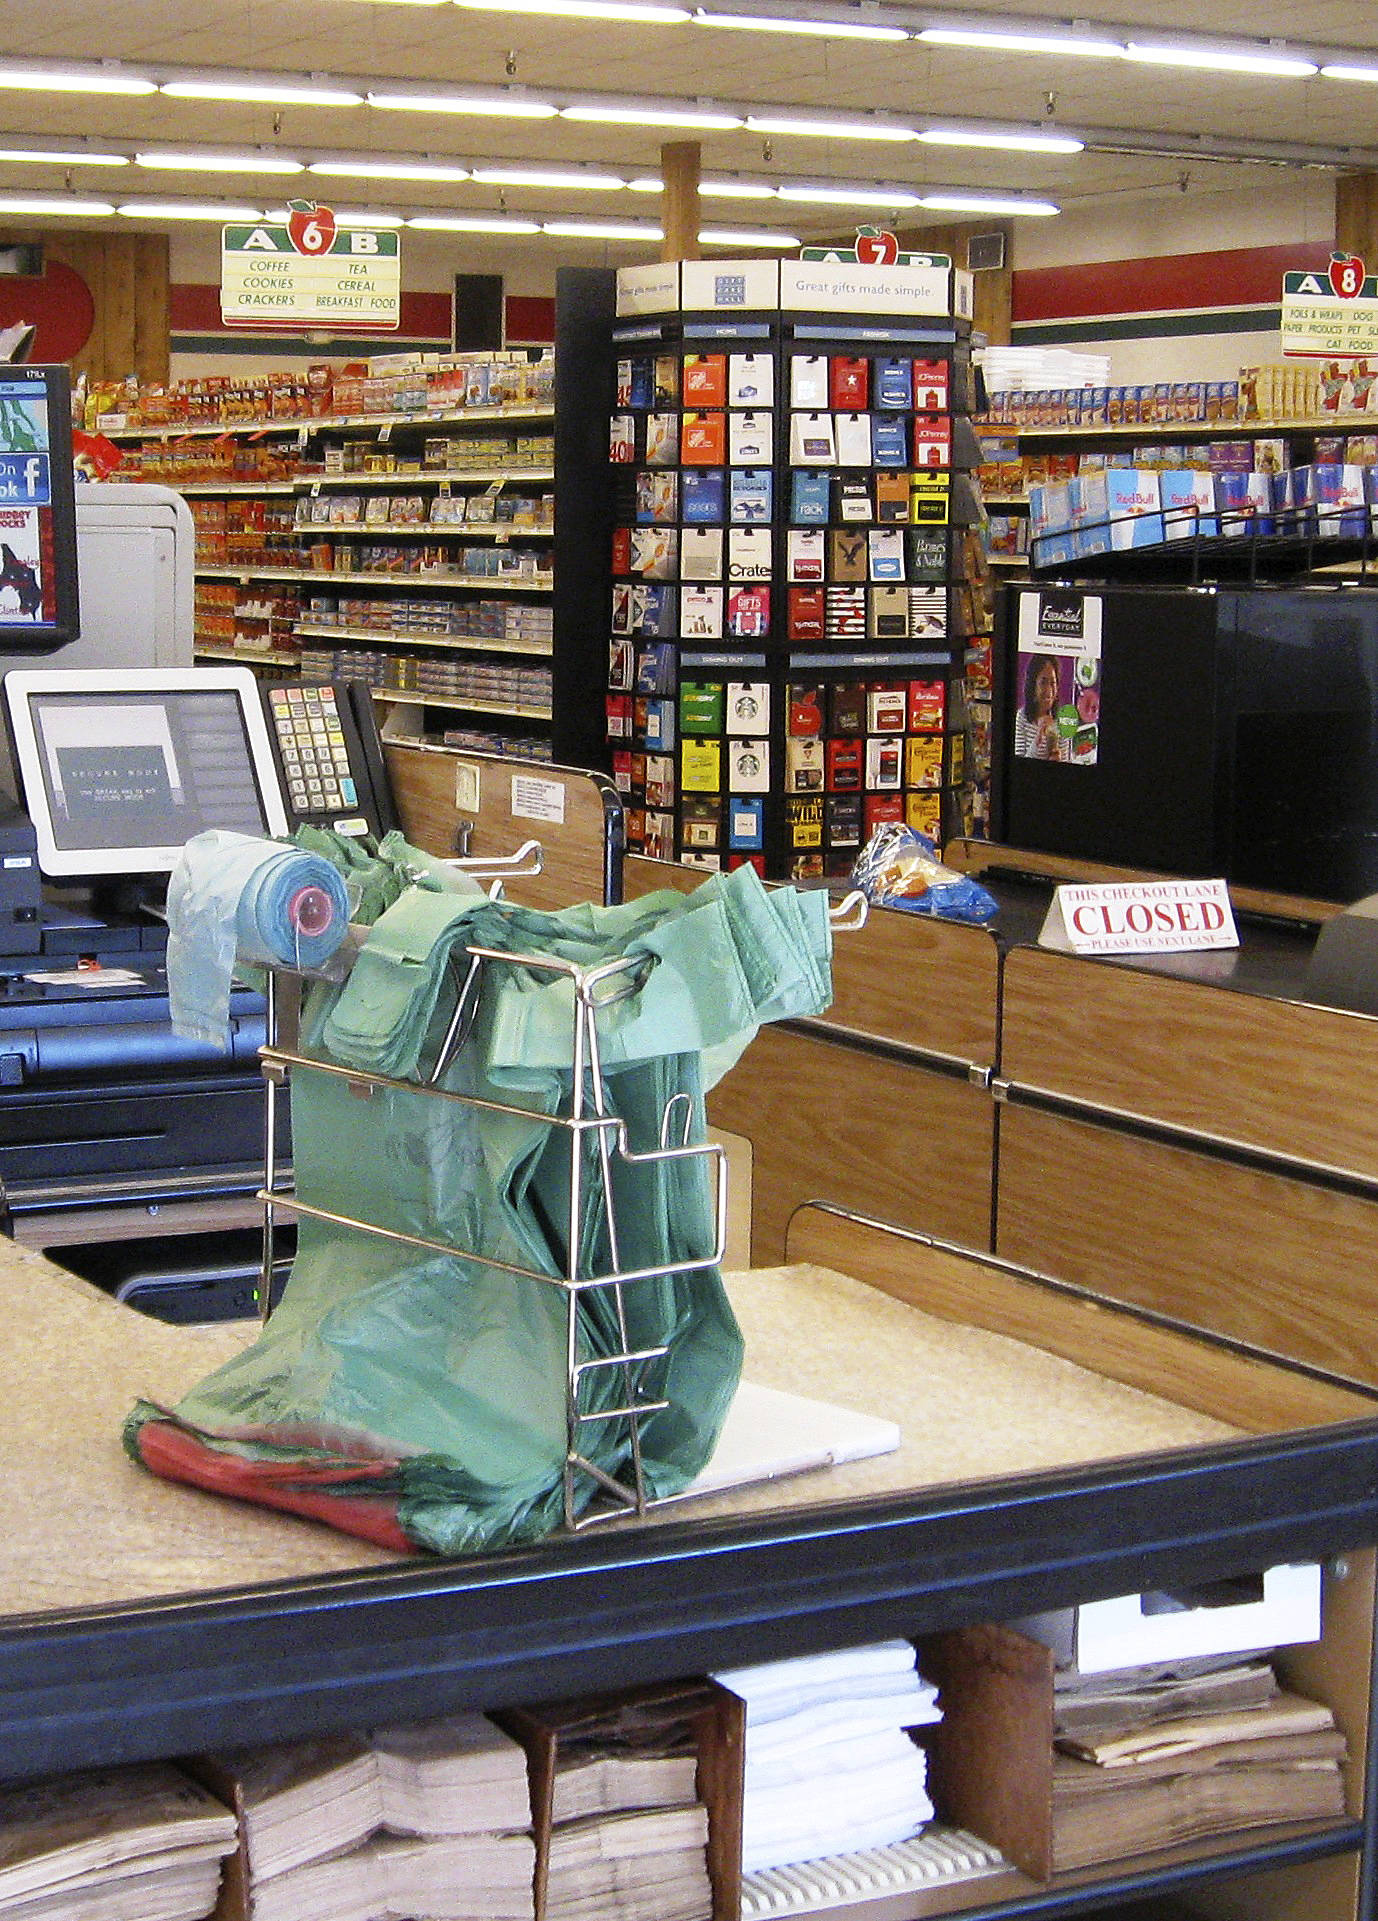 Plastic bags at the check-out counter could be a thing of the past if a legislative proposal to ban the bags is enacted. (Photo by Dave Felice/Whidbey News Group contributor)